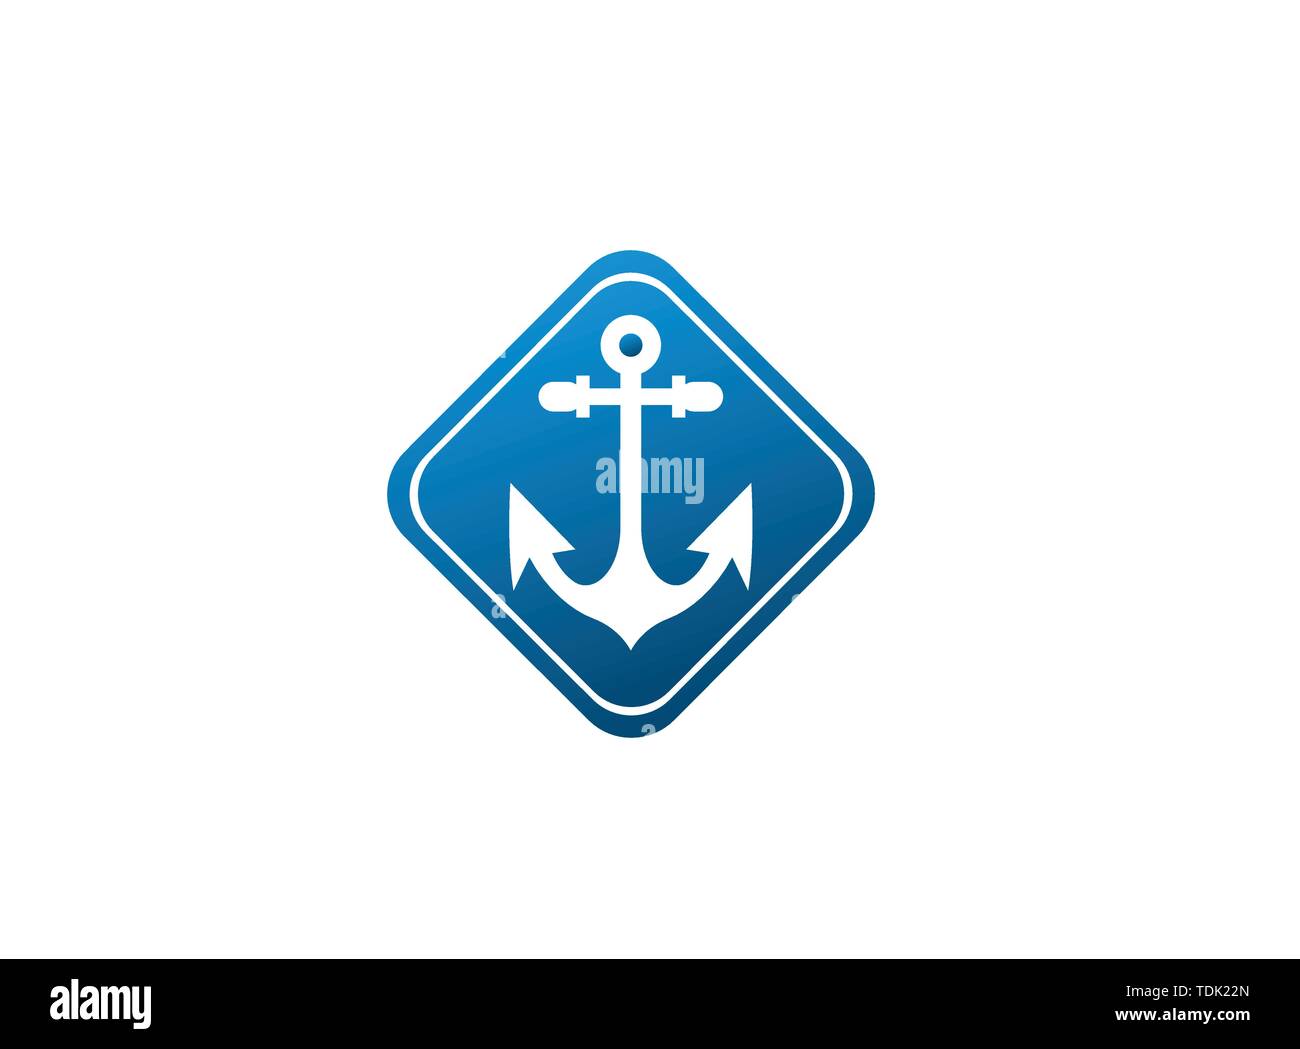 Anchor for boat and yacht logo design illustration in the shape